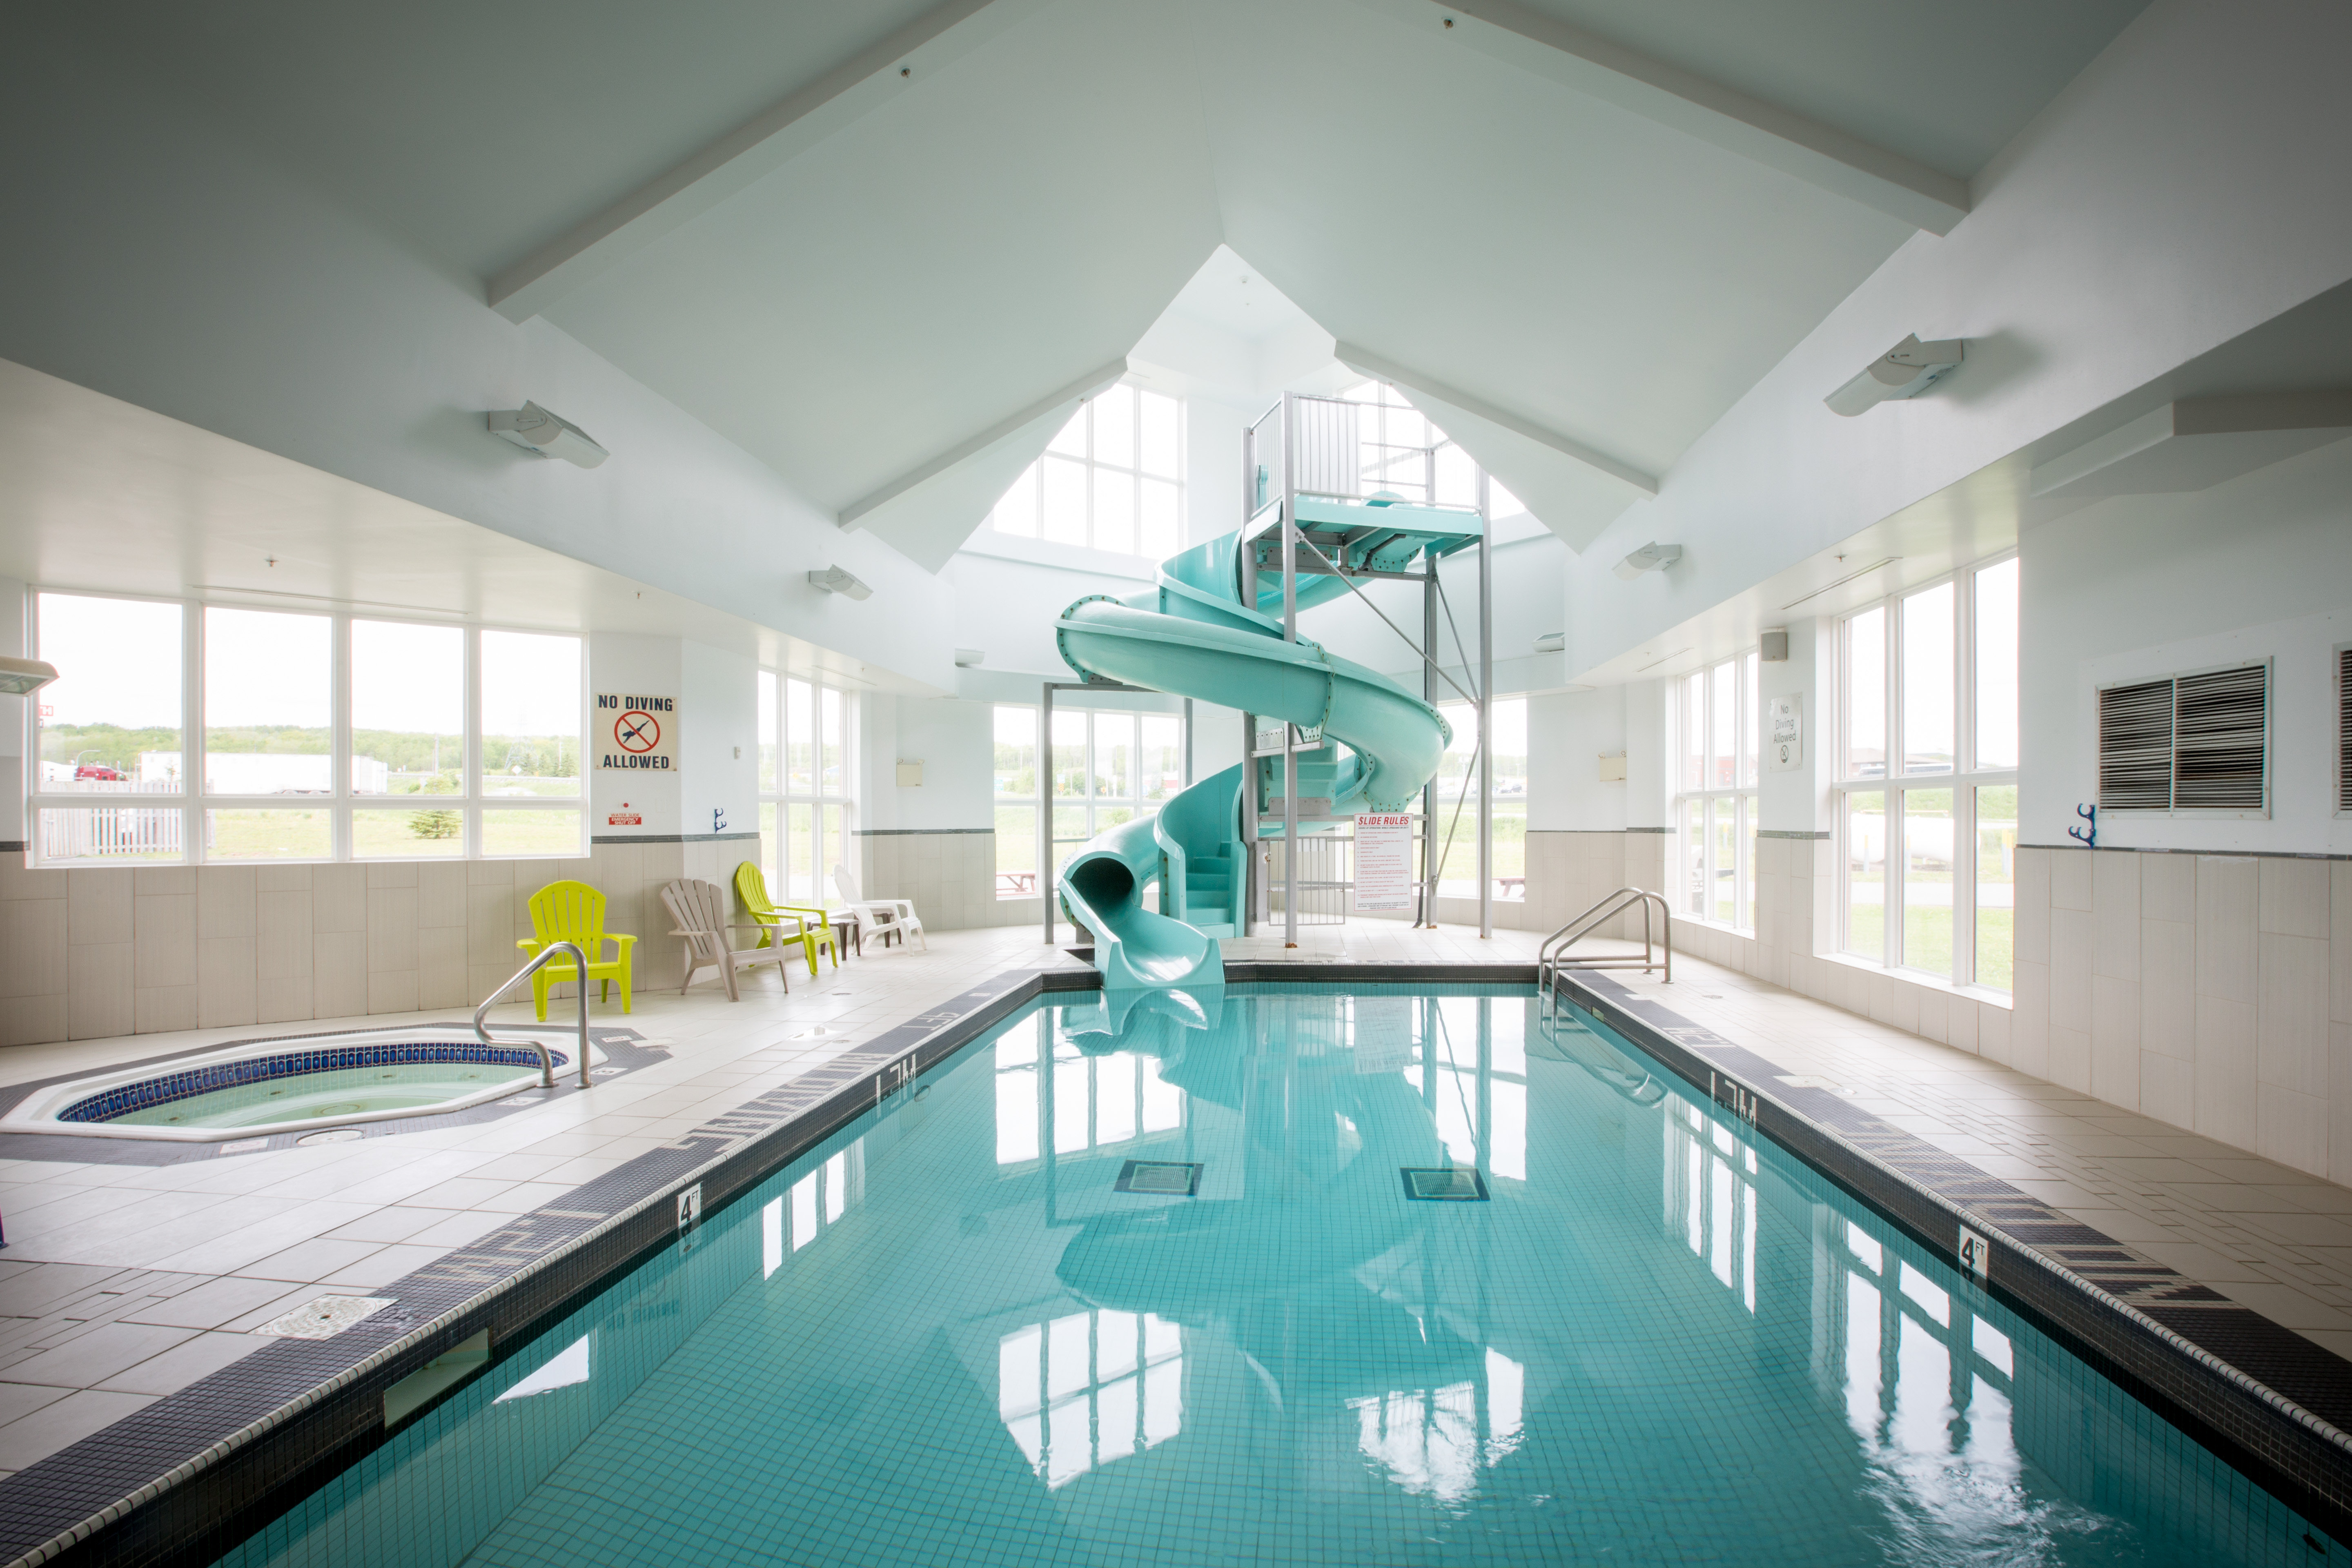 Come and enjoy Stellarton's only hotel with a pool and waterslide!